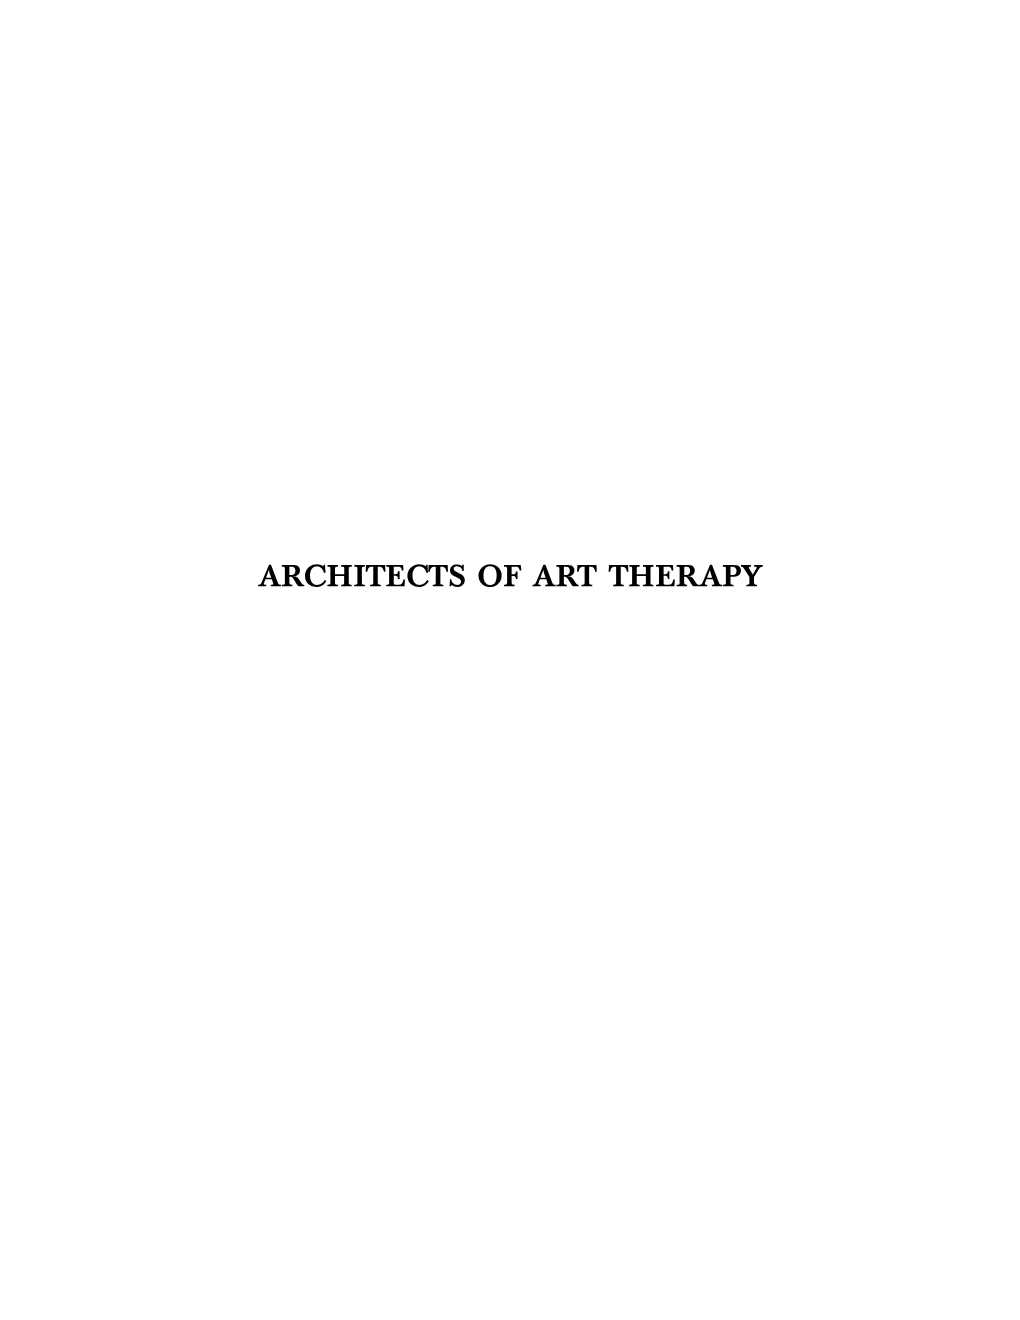 Architects of Art Therapy